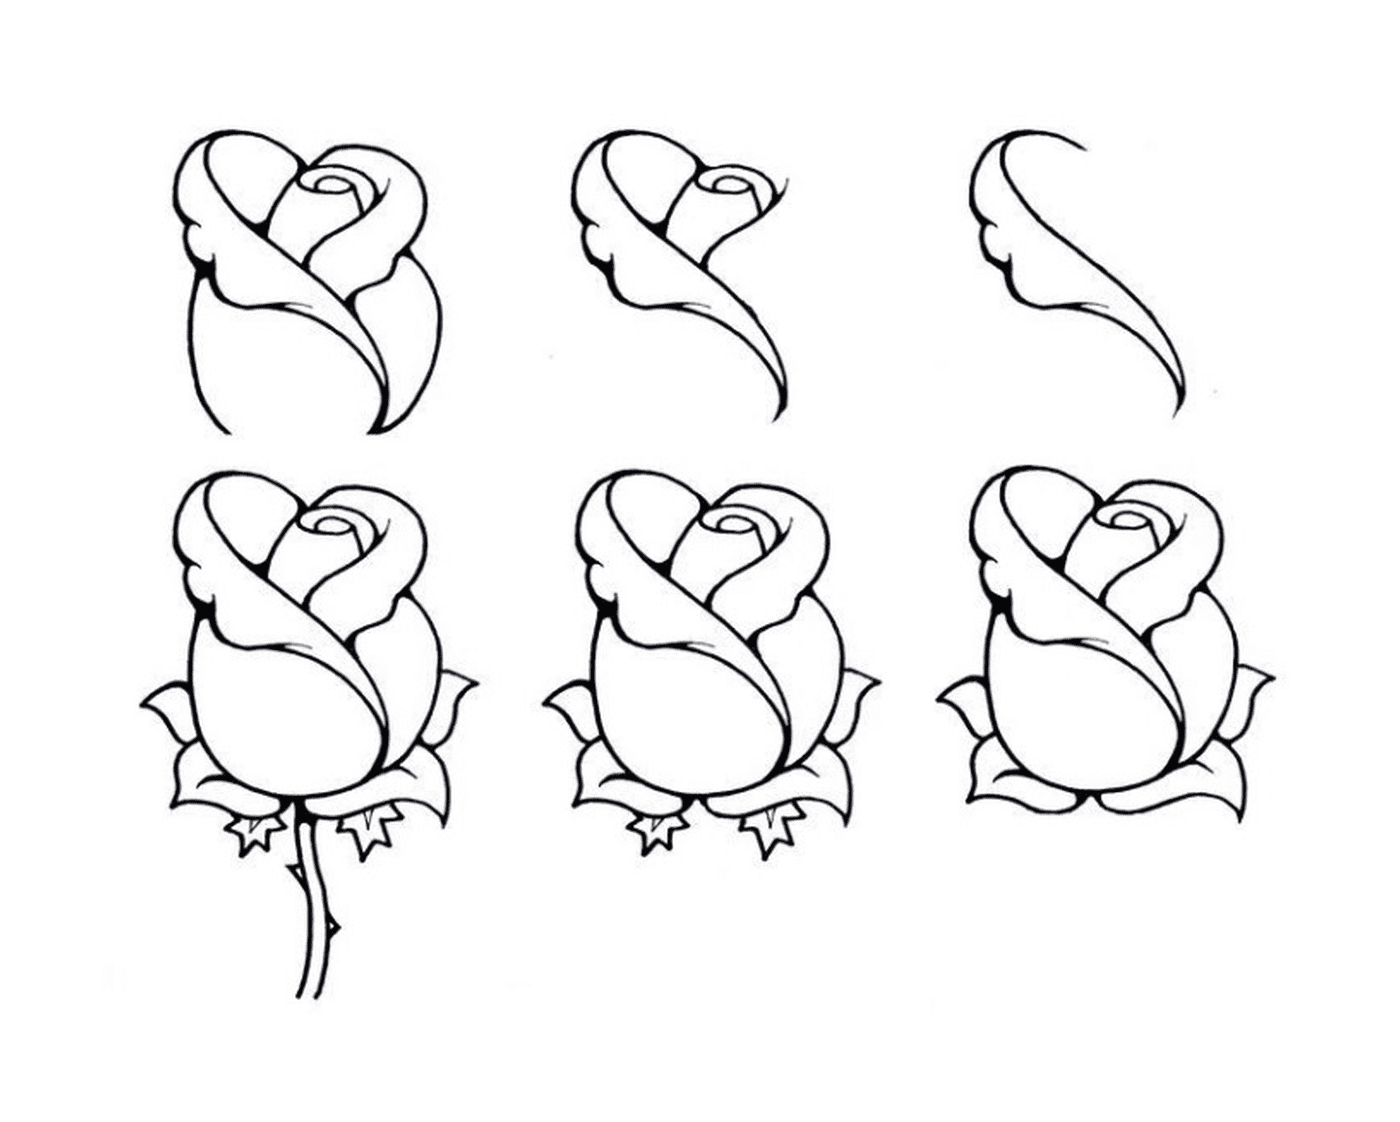  How to draw a rose easily 